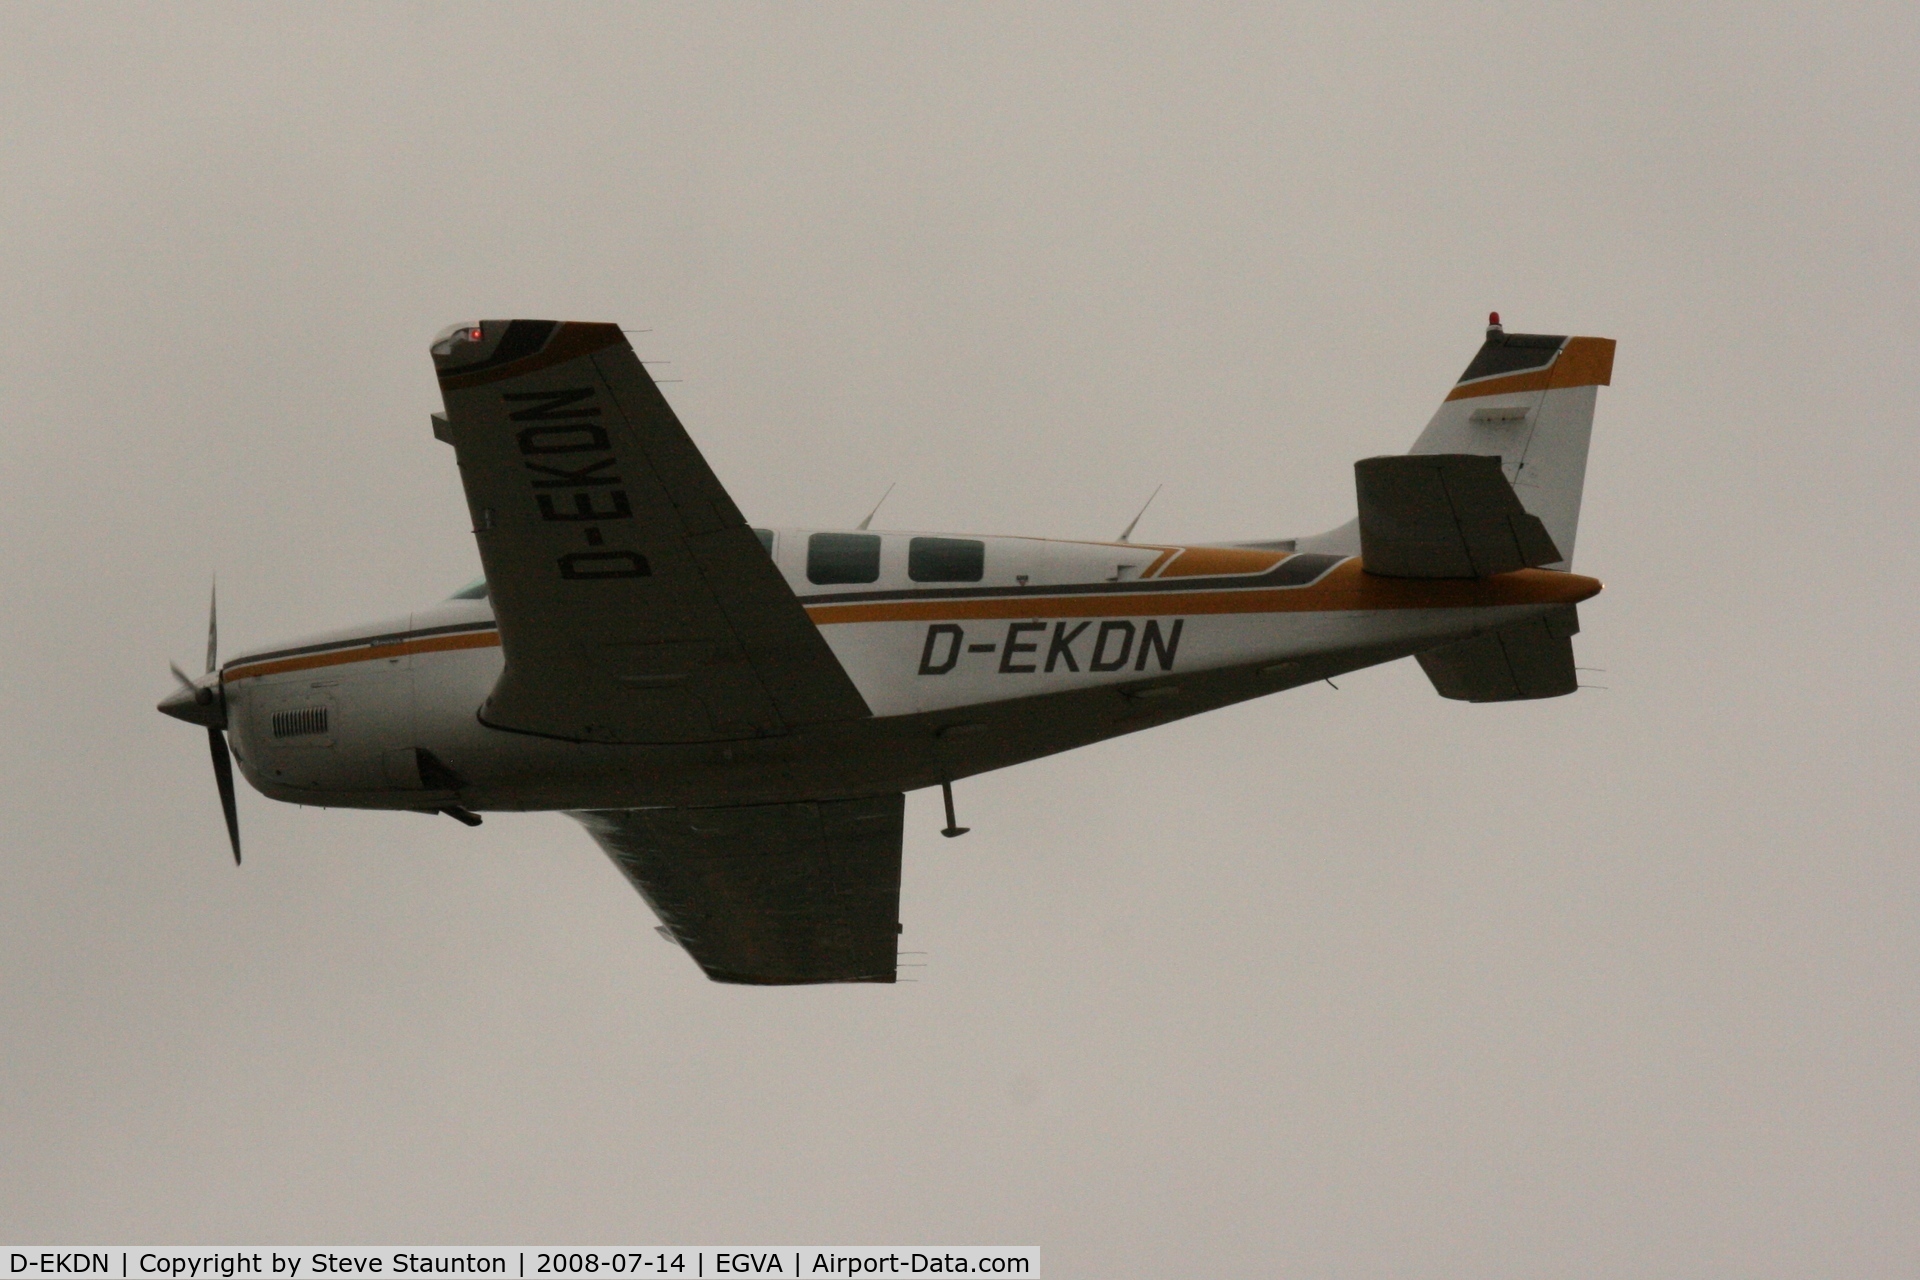 D-EKDN, 1987 Beechcraft A36 Bonanza C/N E-2353, Taken at the Royal International Air Tattoo 2008 during arrivals and departures (show days cancelled due to bad weather)